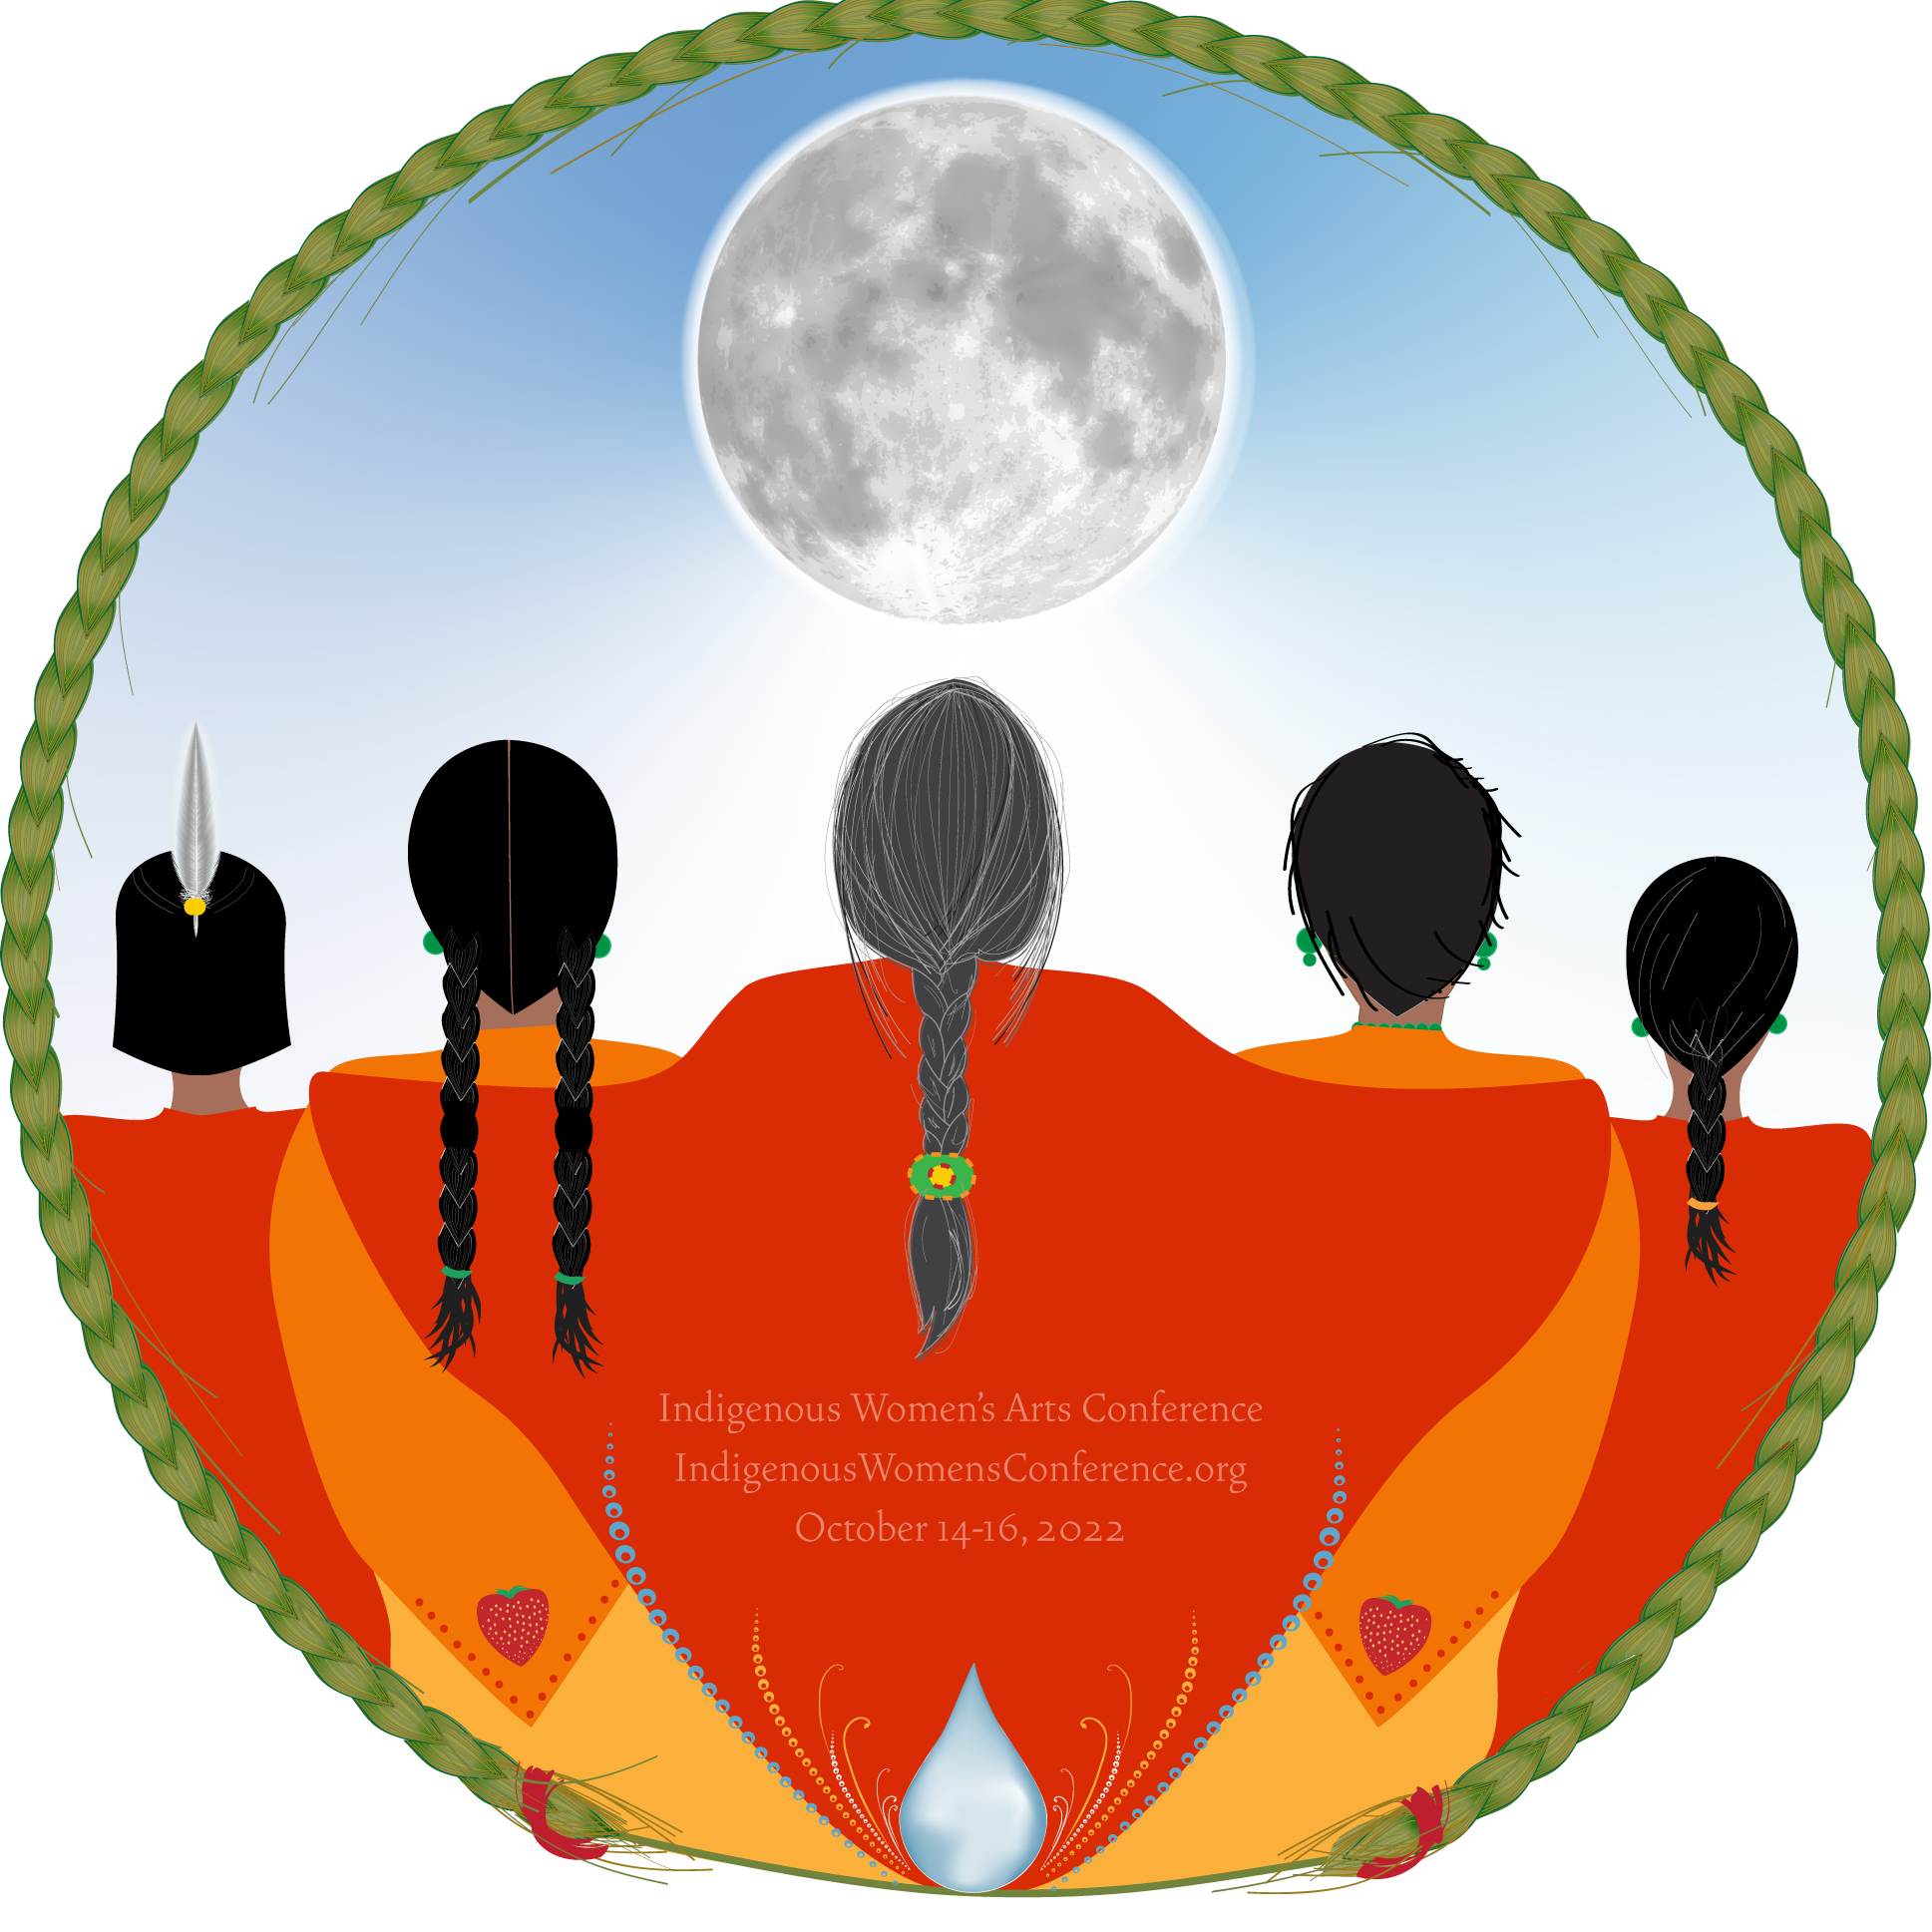 Indigenous women's arts conference, pass the feather, indigenous arts collective of canada, logo